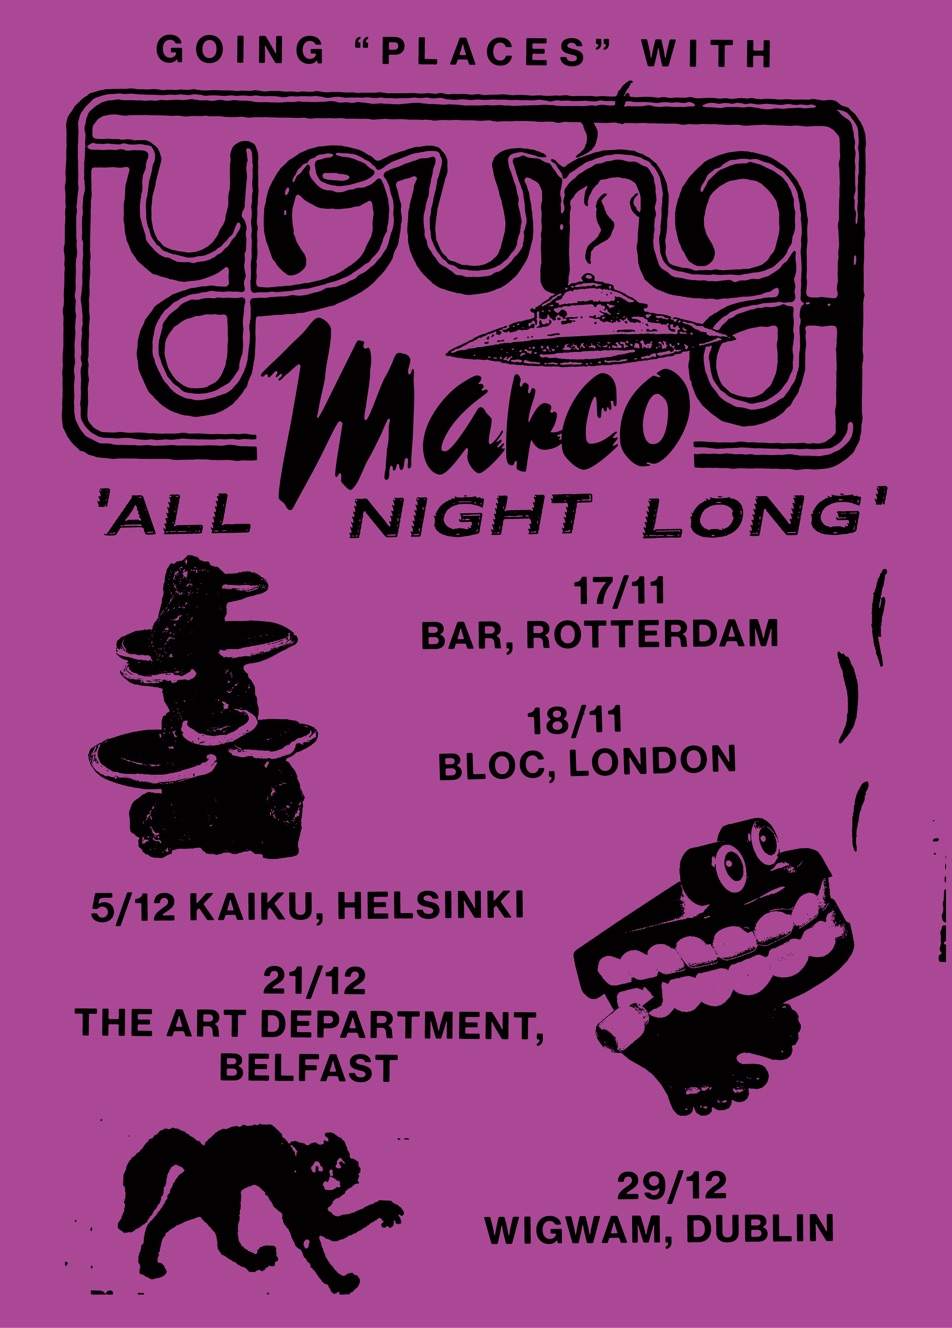 Young Marco heads on mini-tour of all-night sets image